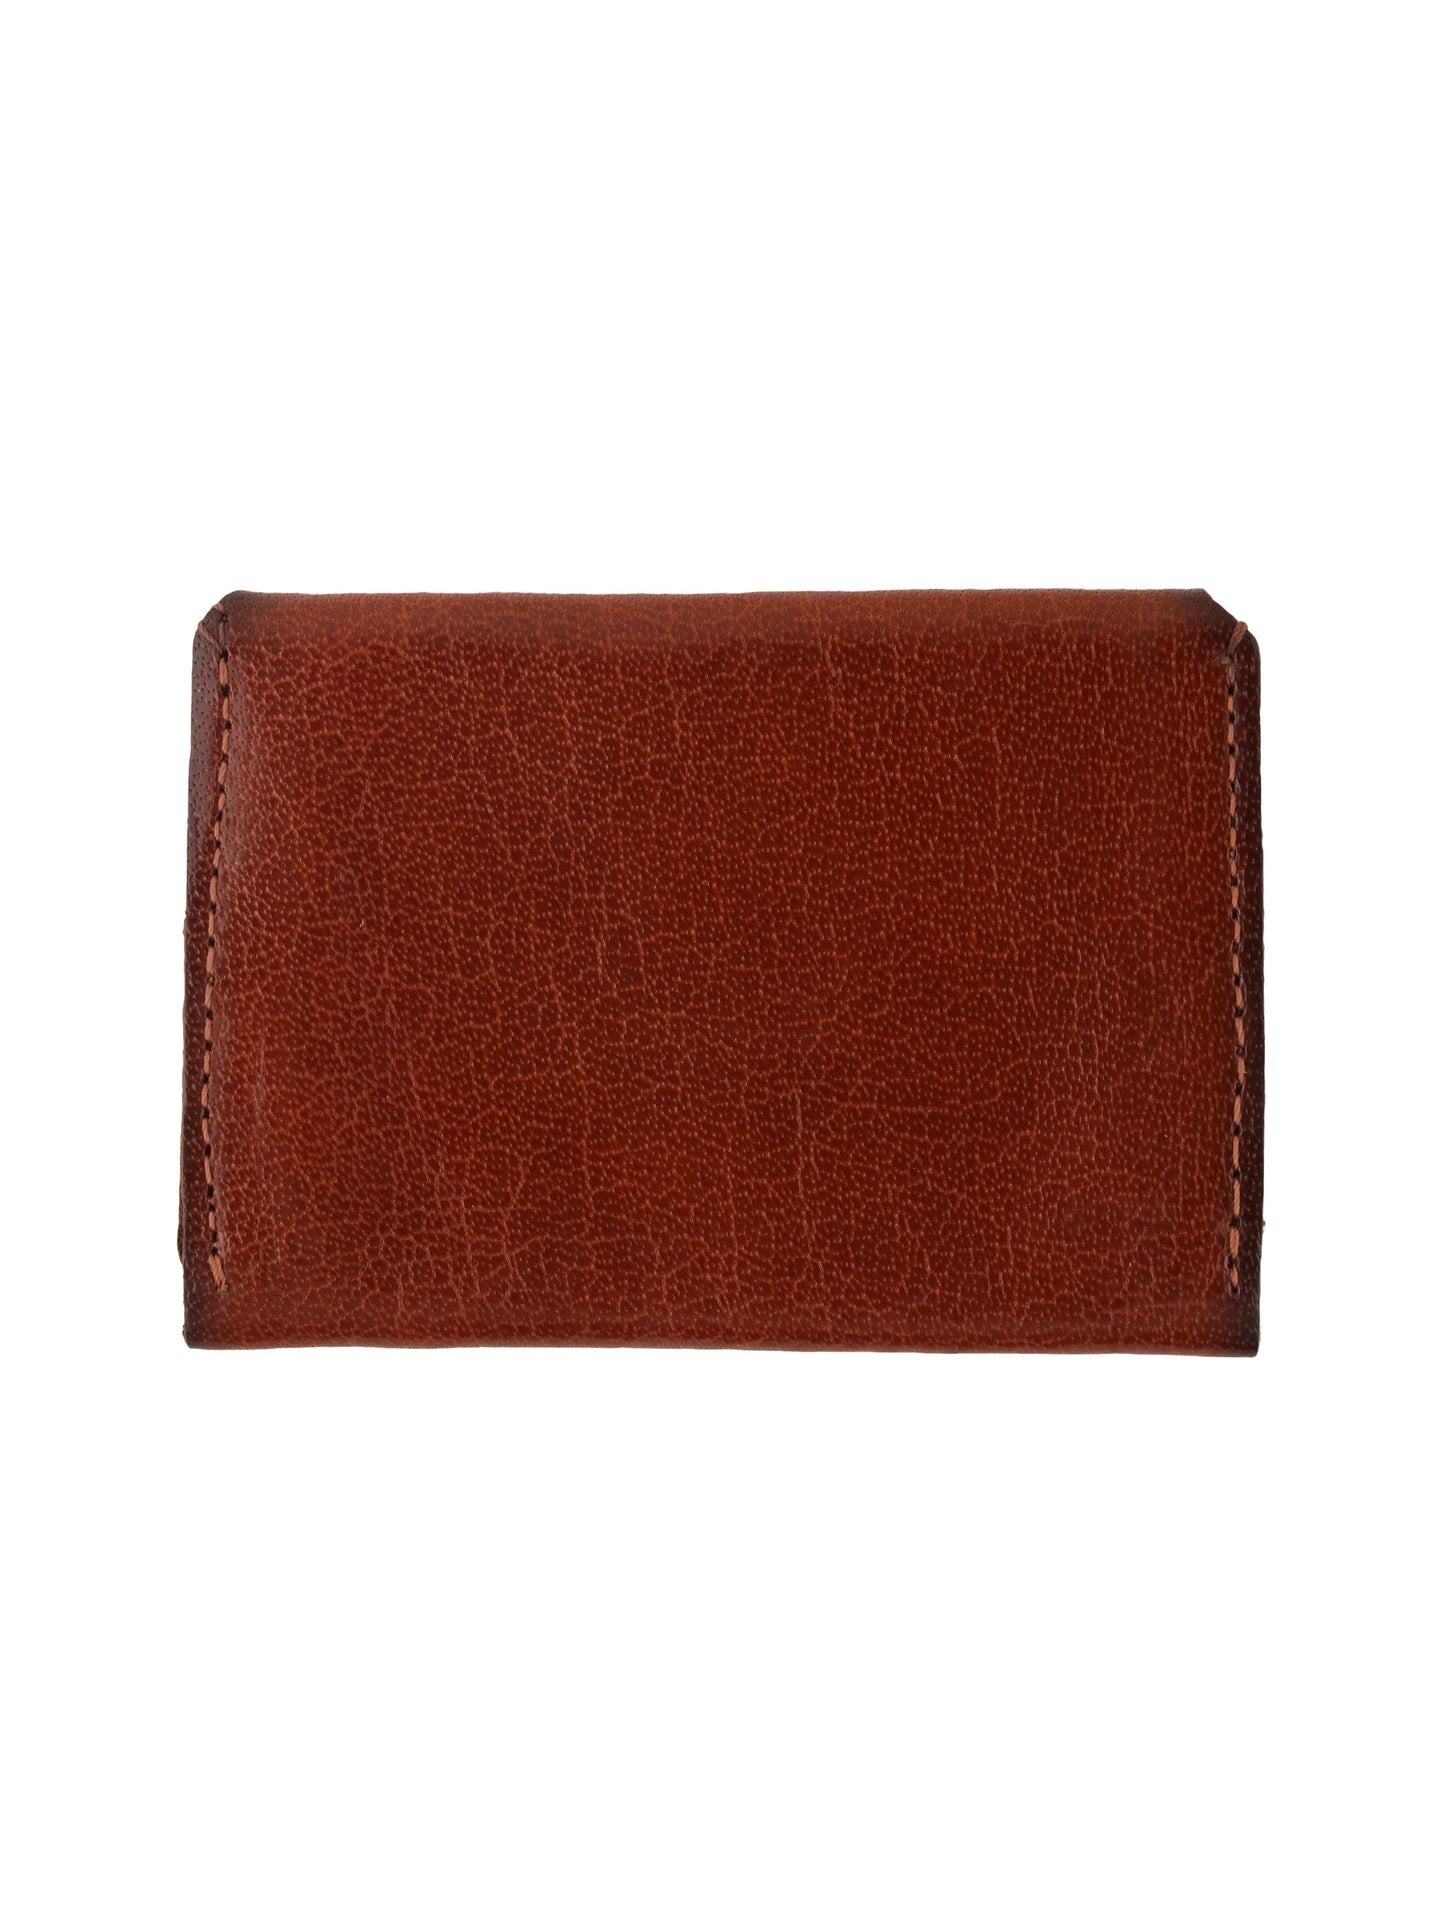 Two tone brown patina finish cardholder